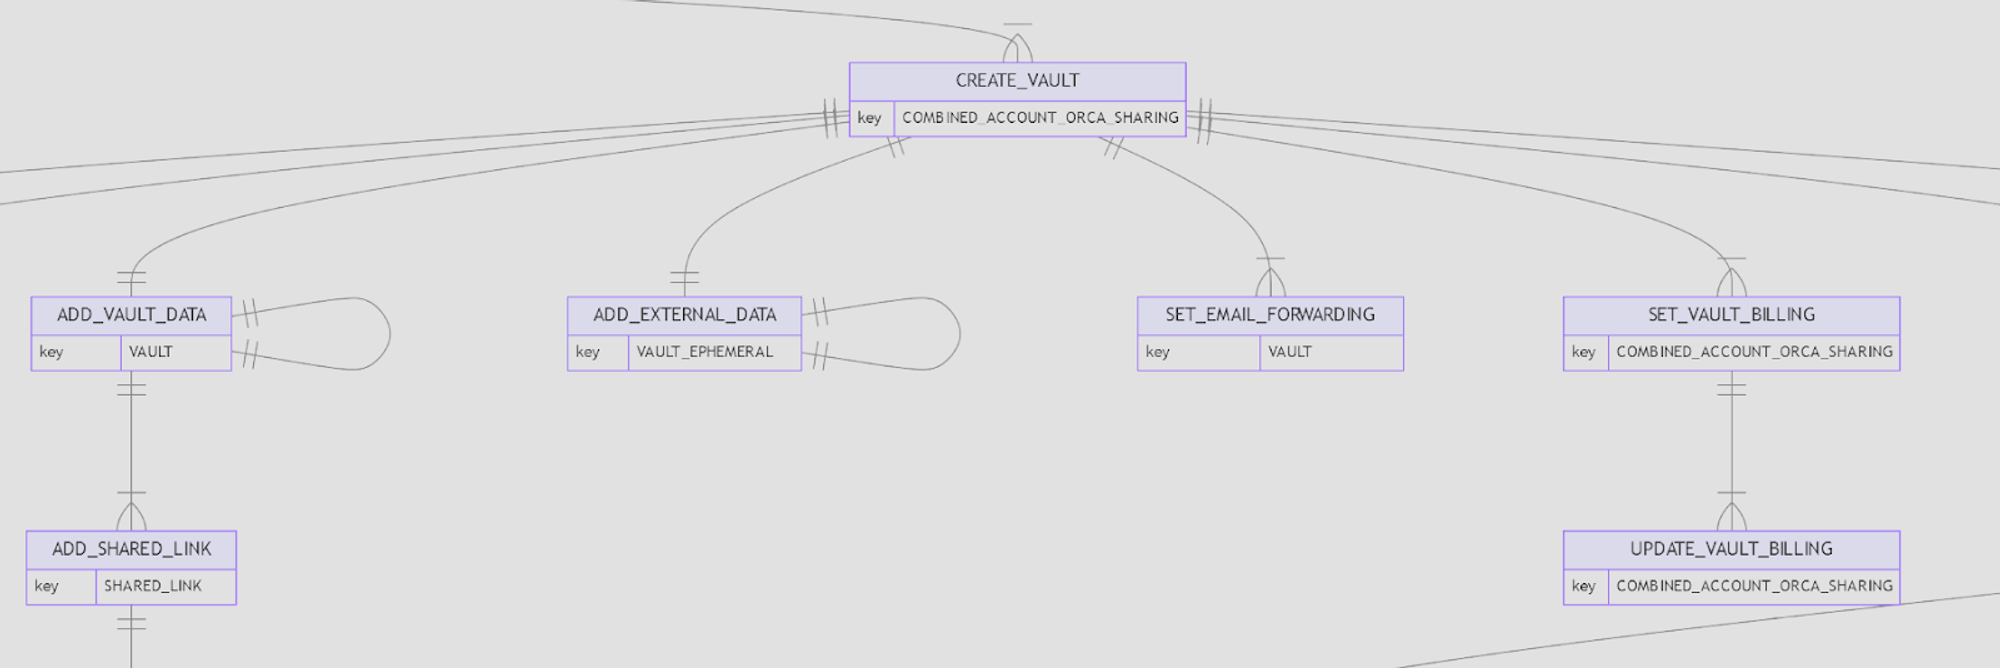 Image 8: Part of the Vault Branch in ORCA’s Hash Tree